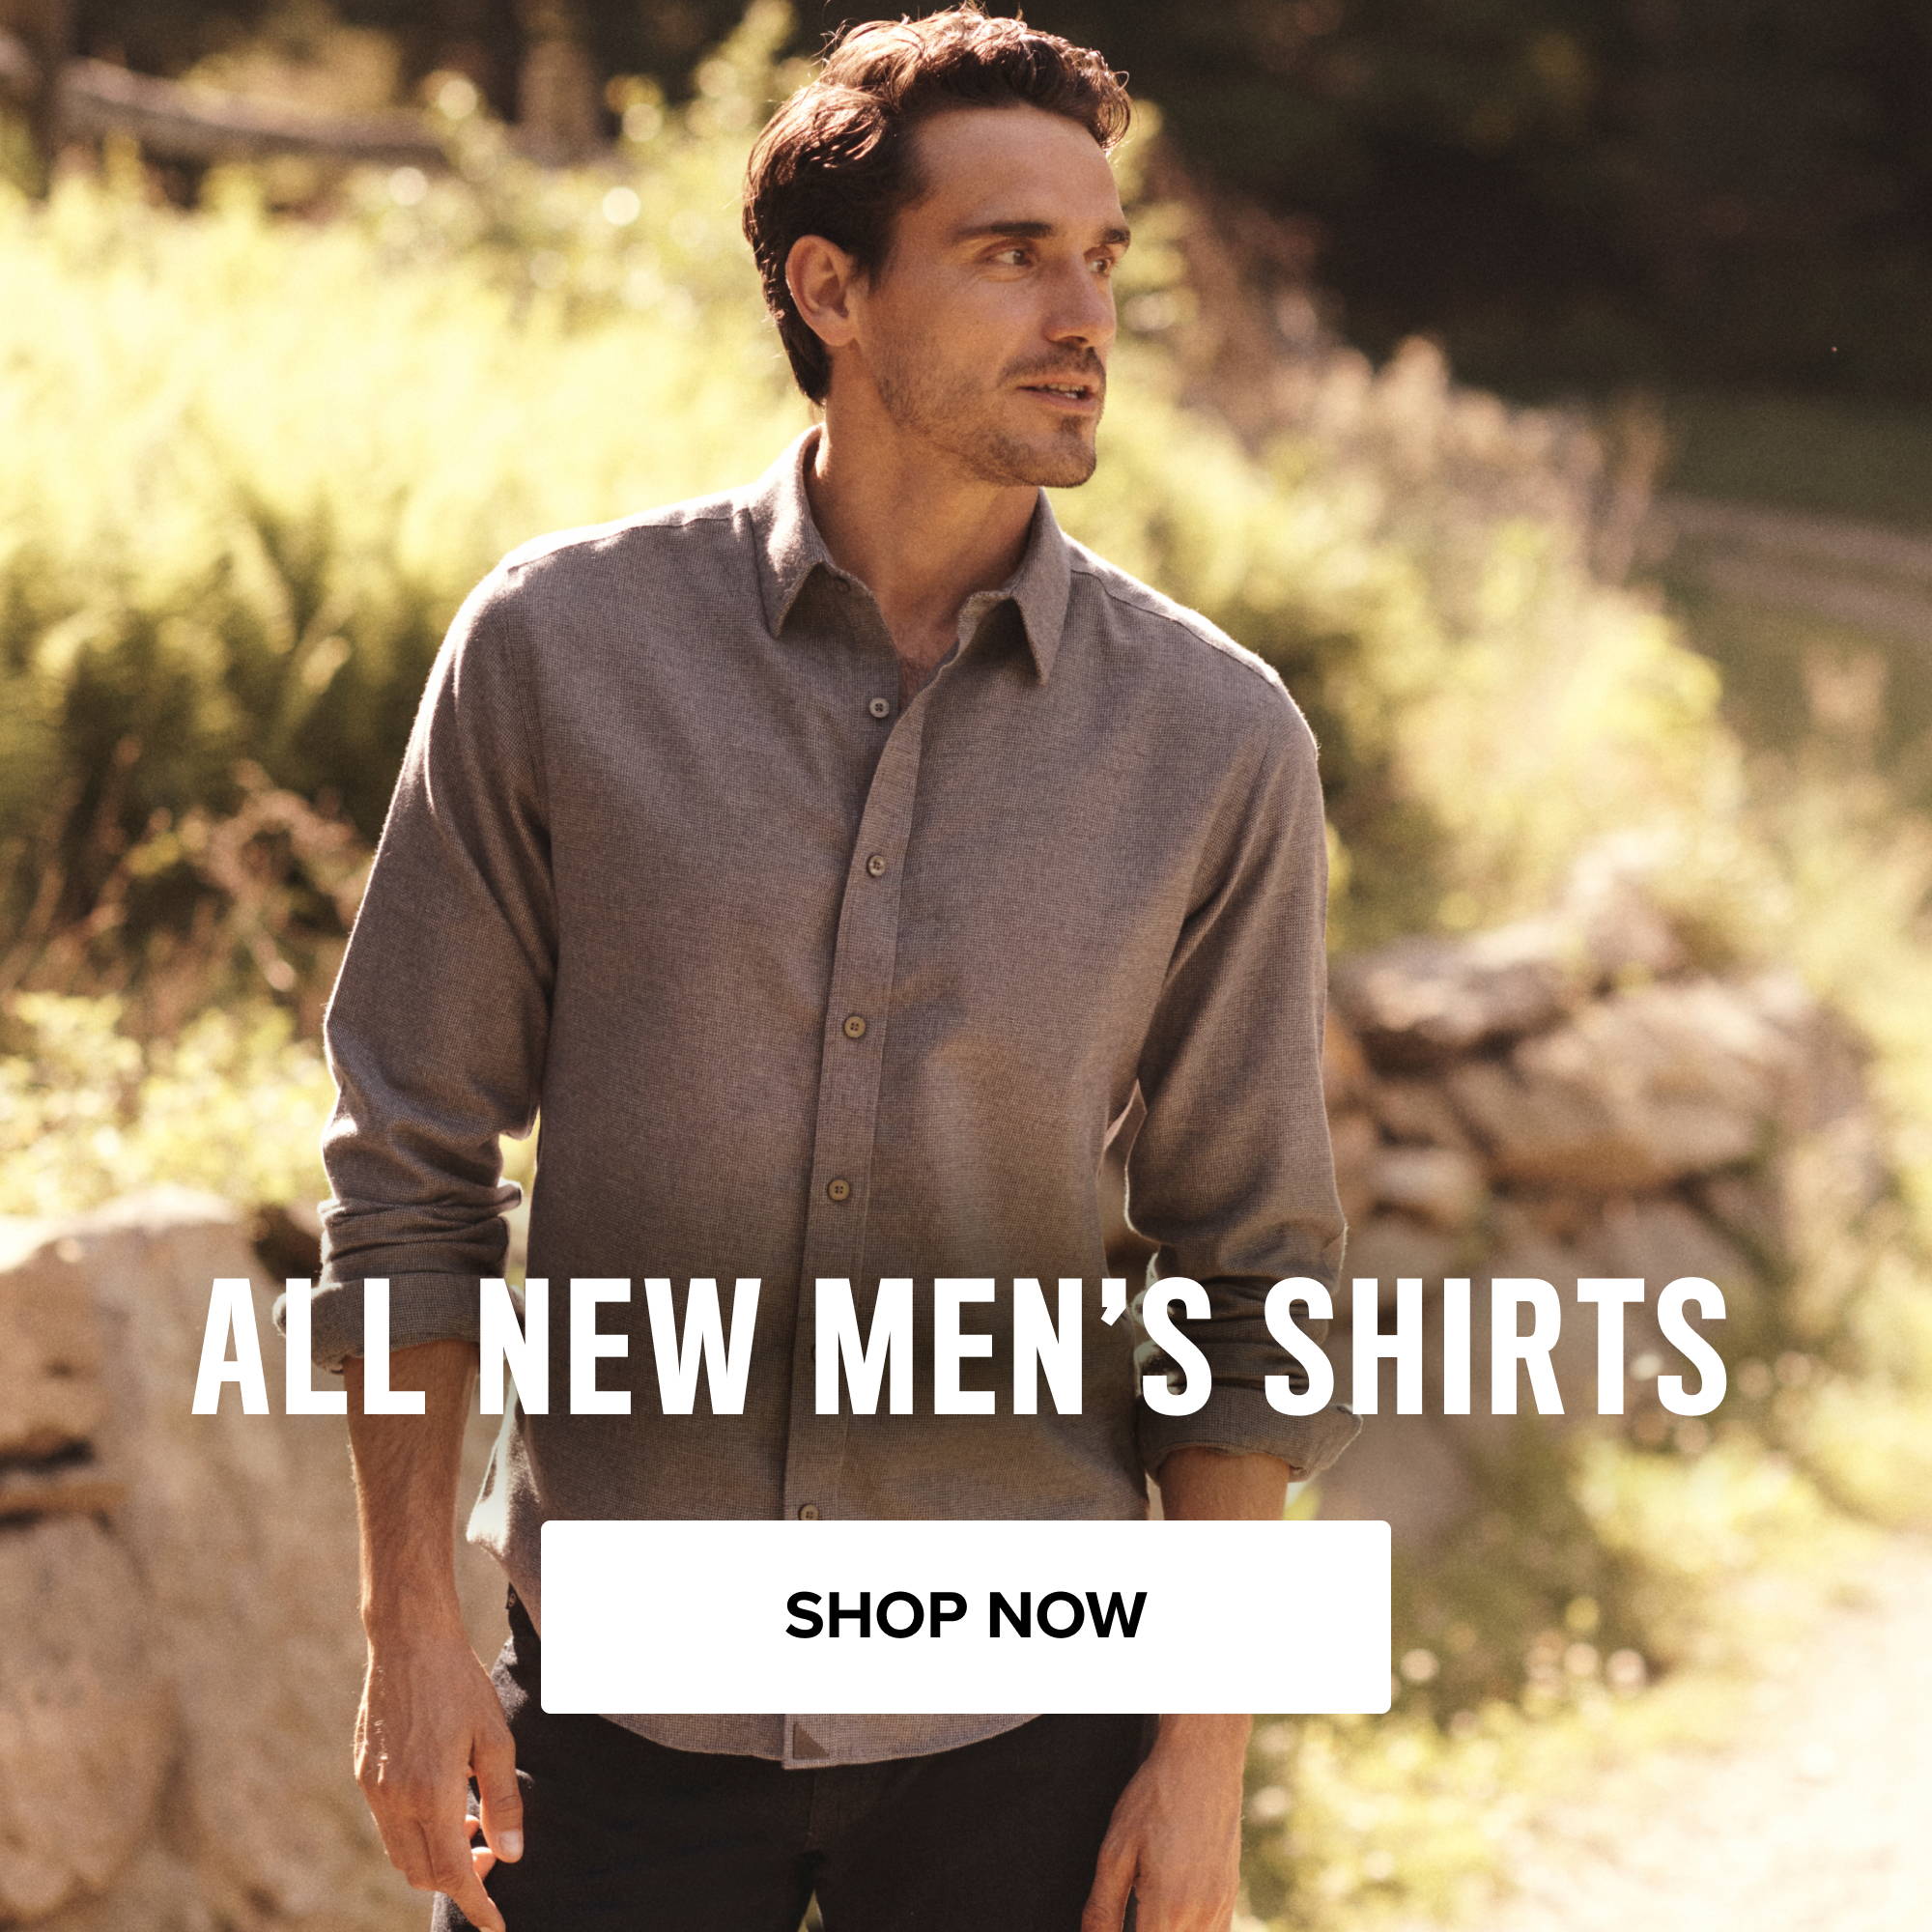 all new men's shirts